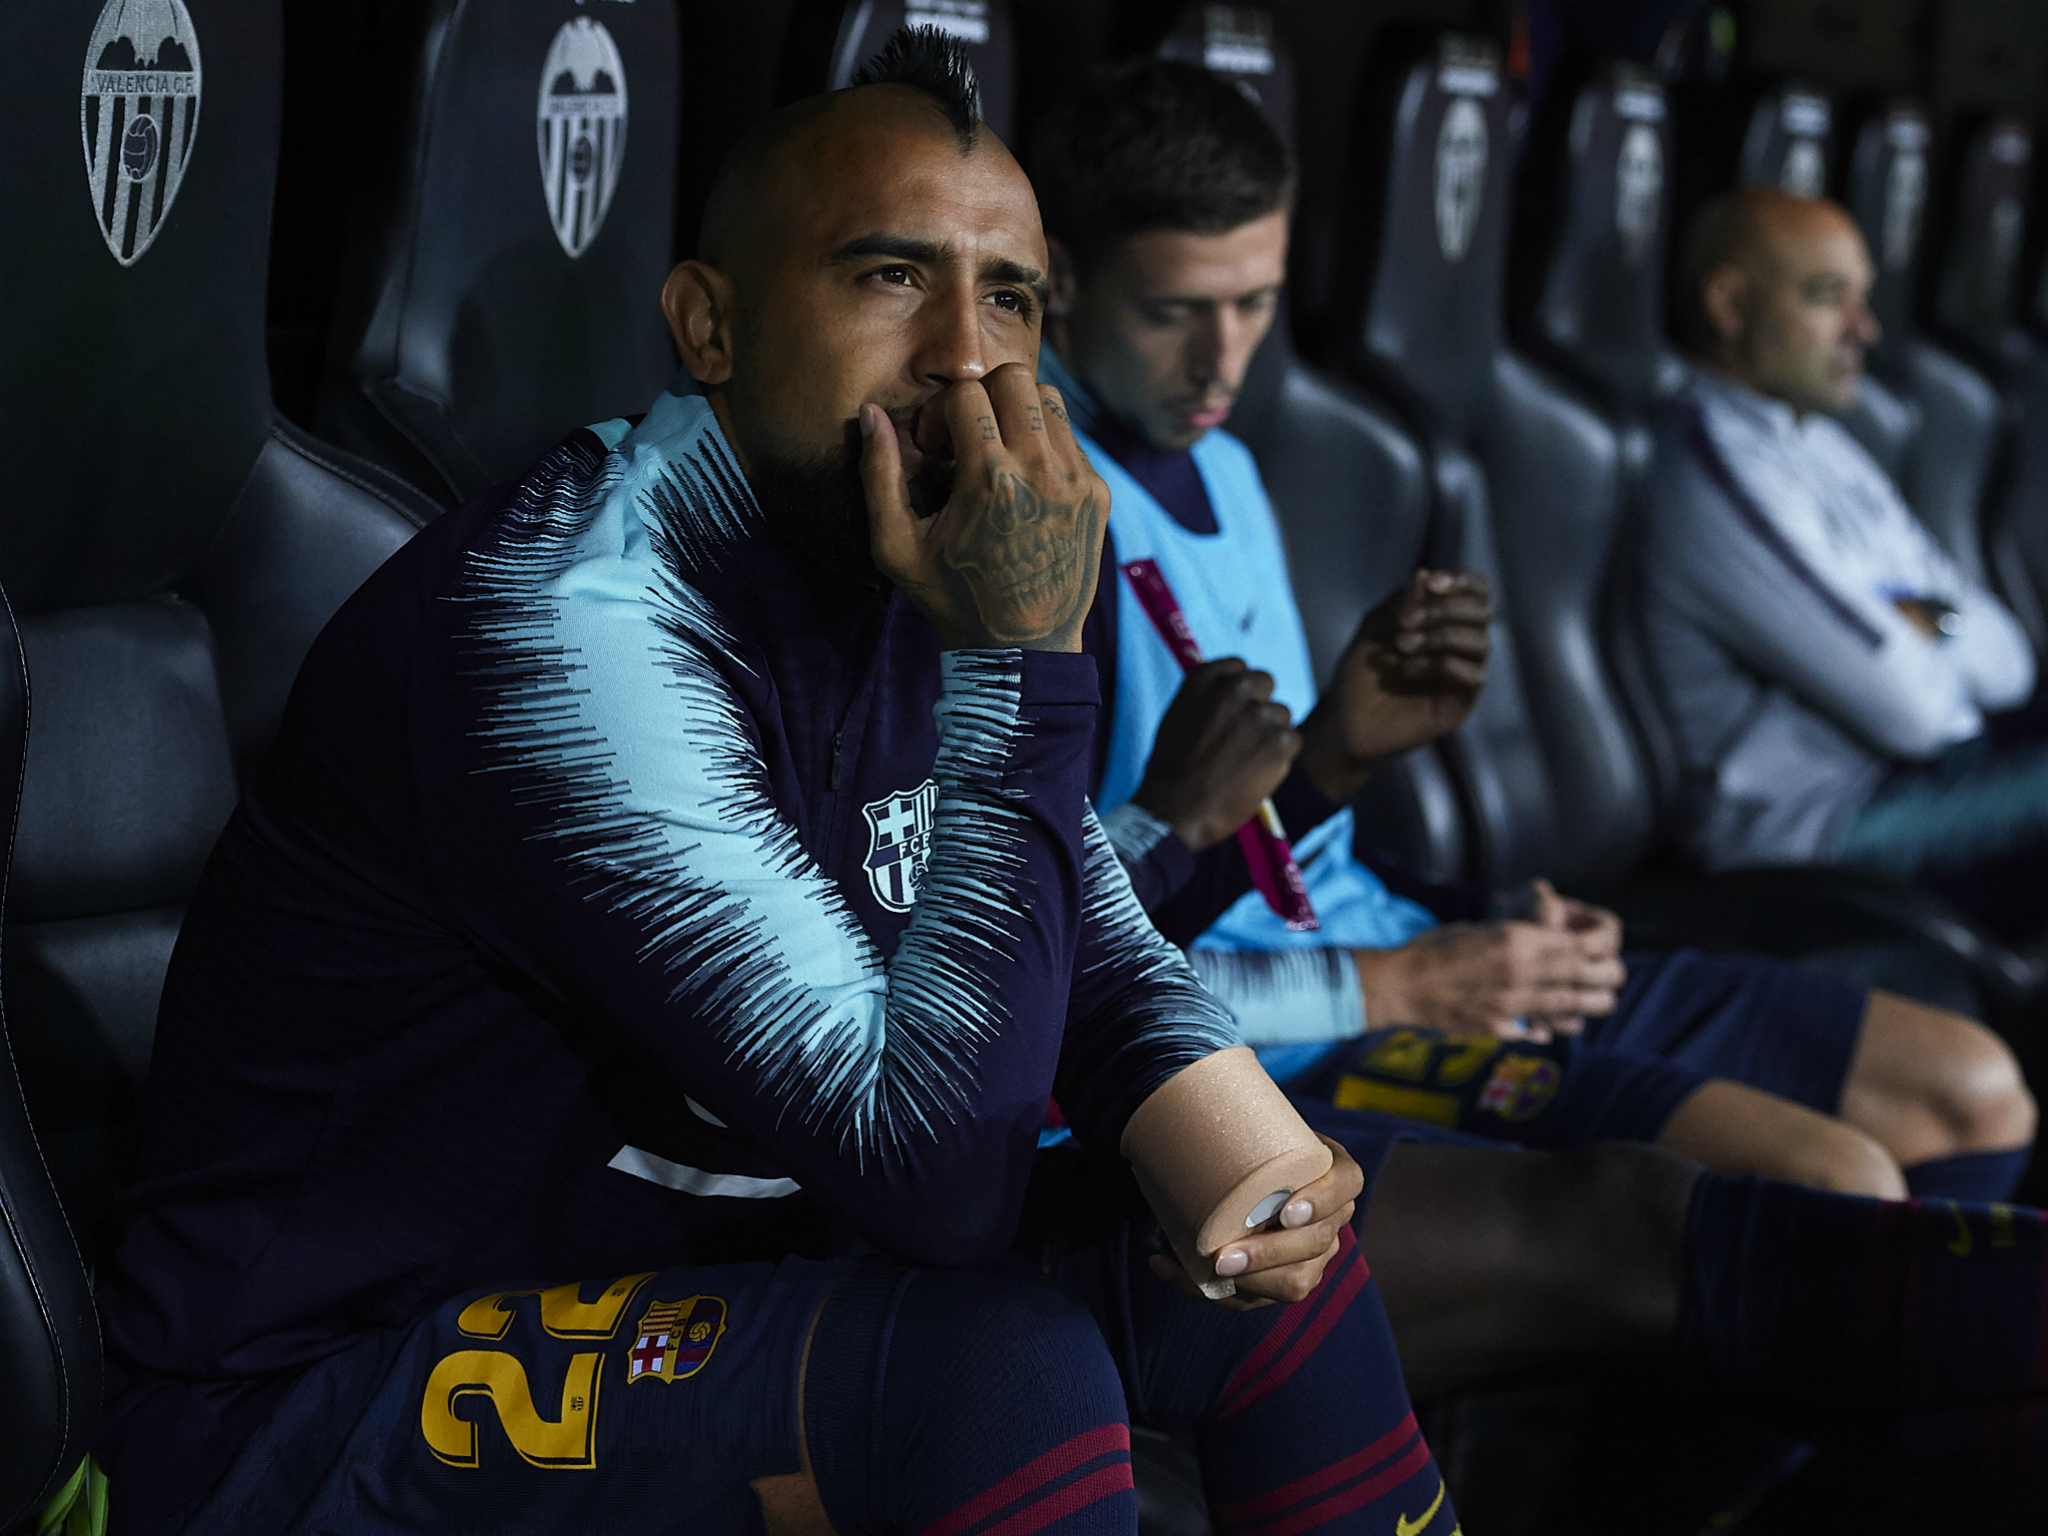 Vidal has spent most of his time on the bench since joining Barcelona